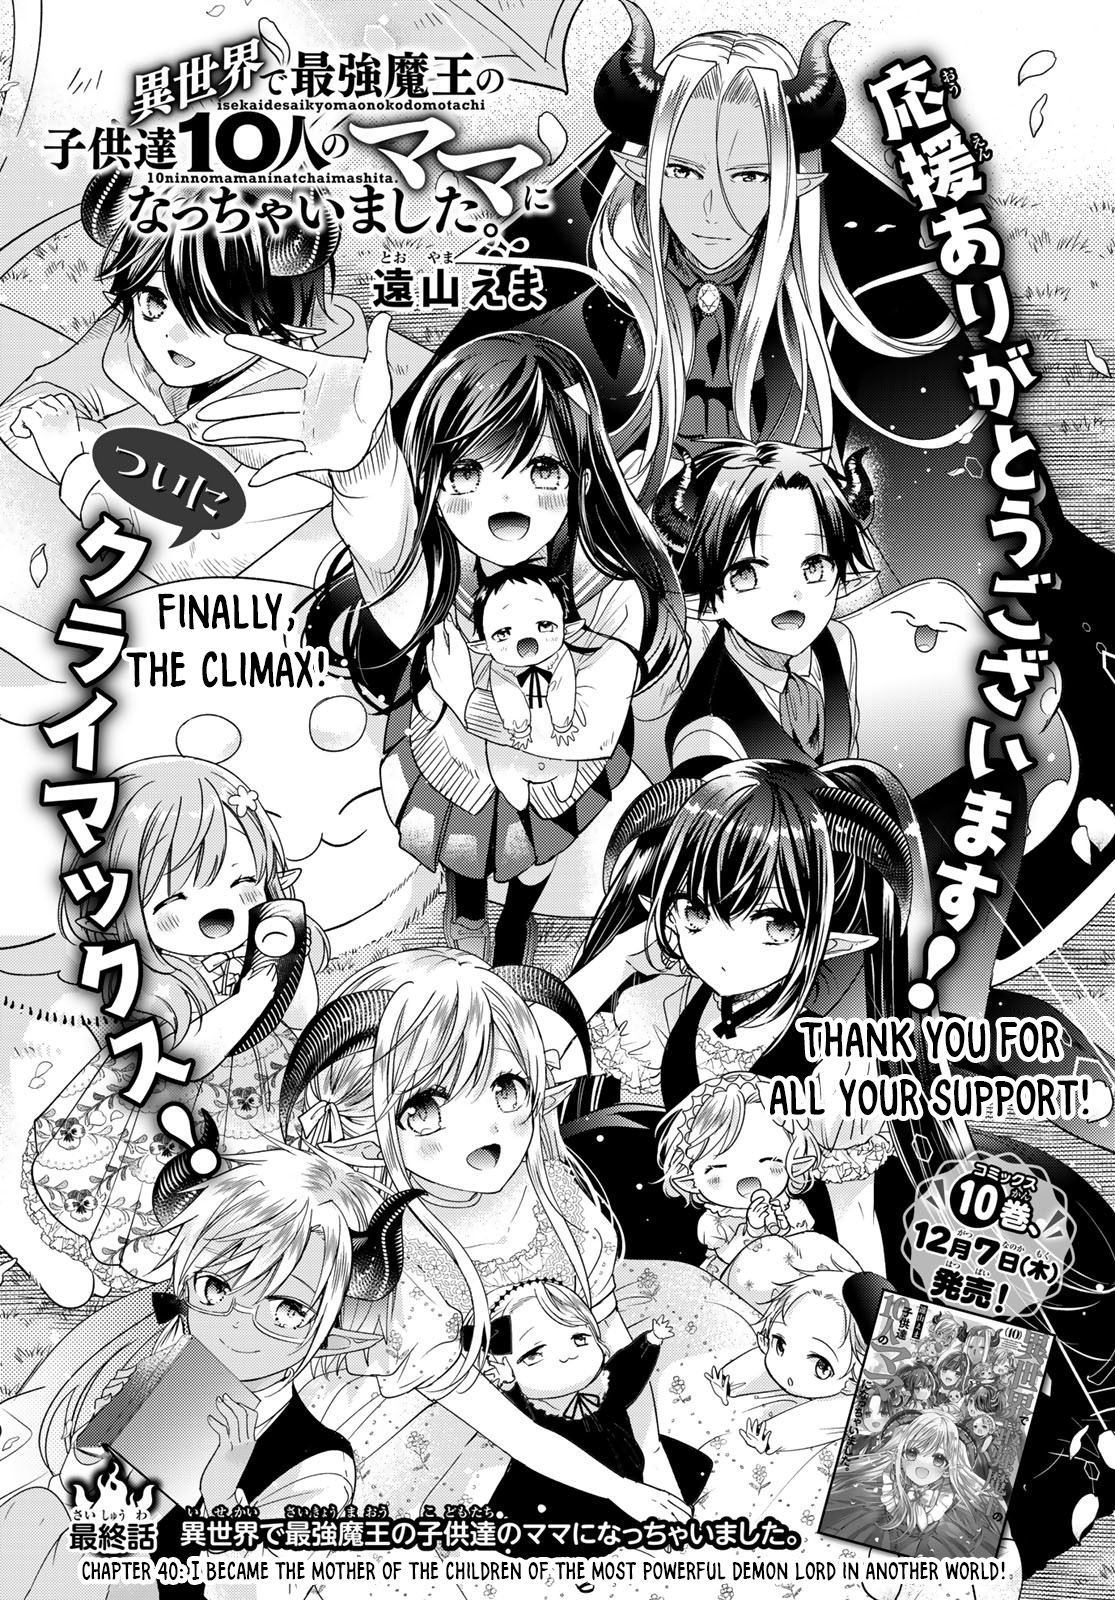 I Guess I Became The Mother Of The Great Demon King's 10 Children In Another World Vol.10 Chapter 40: Chapter 40: I Became The Mother Of The Children Of The Most Powerful Demon Lord In Another World - Picture 1